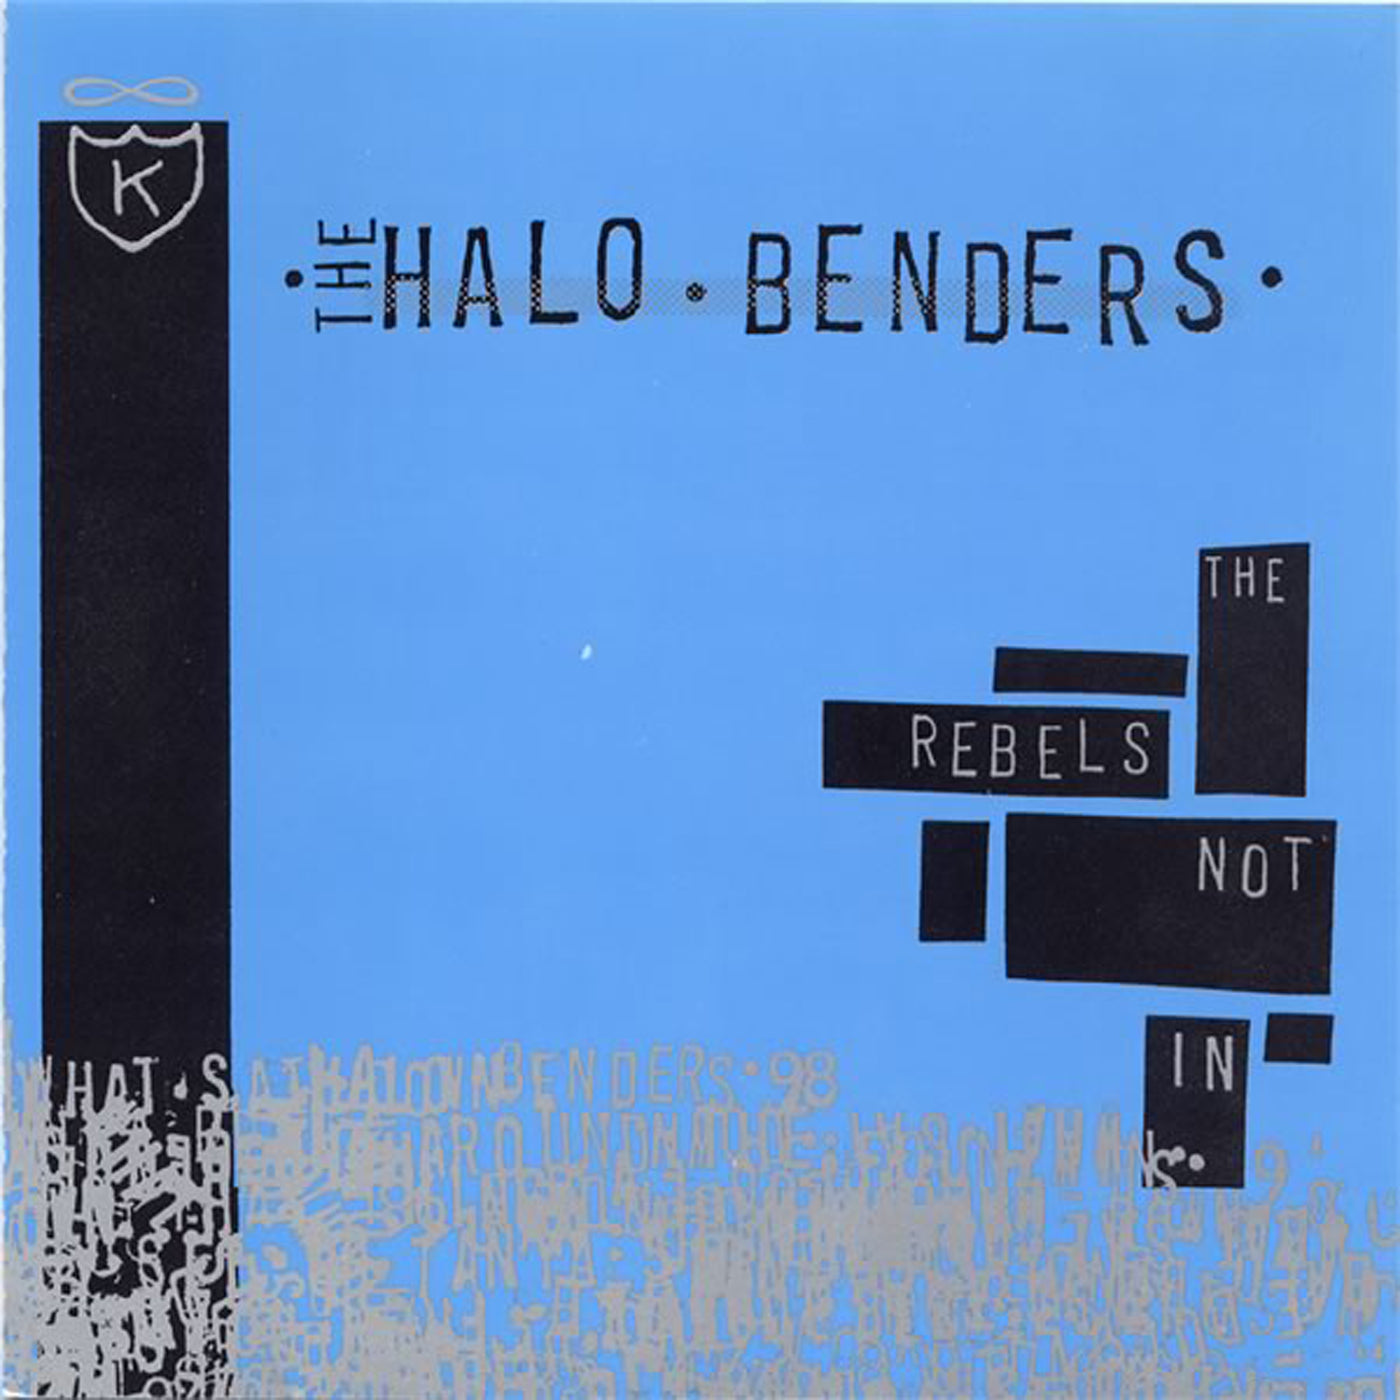 The Halo Benders - The Rebels Not In LP